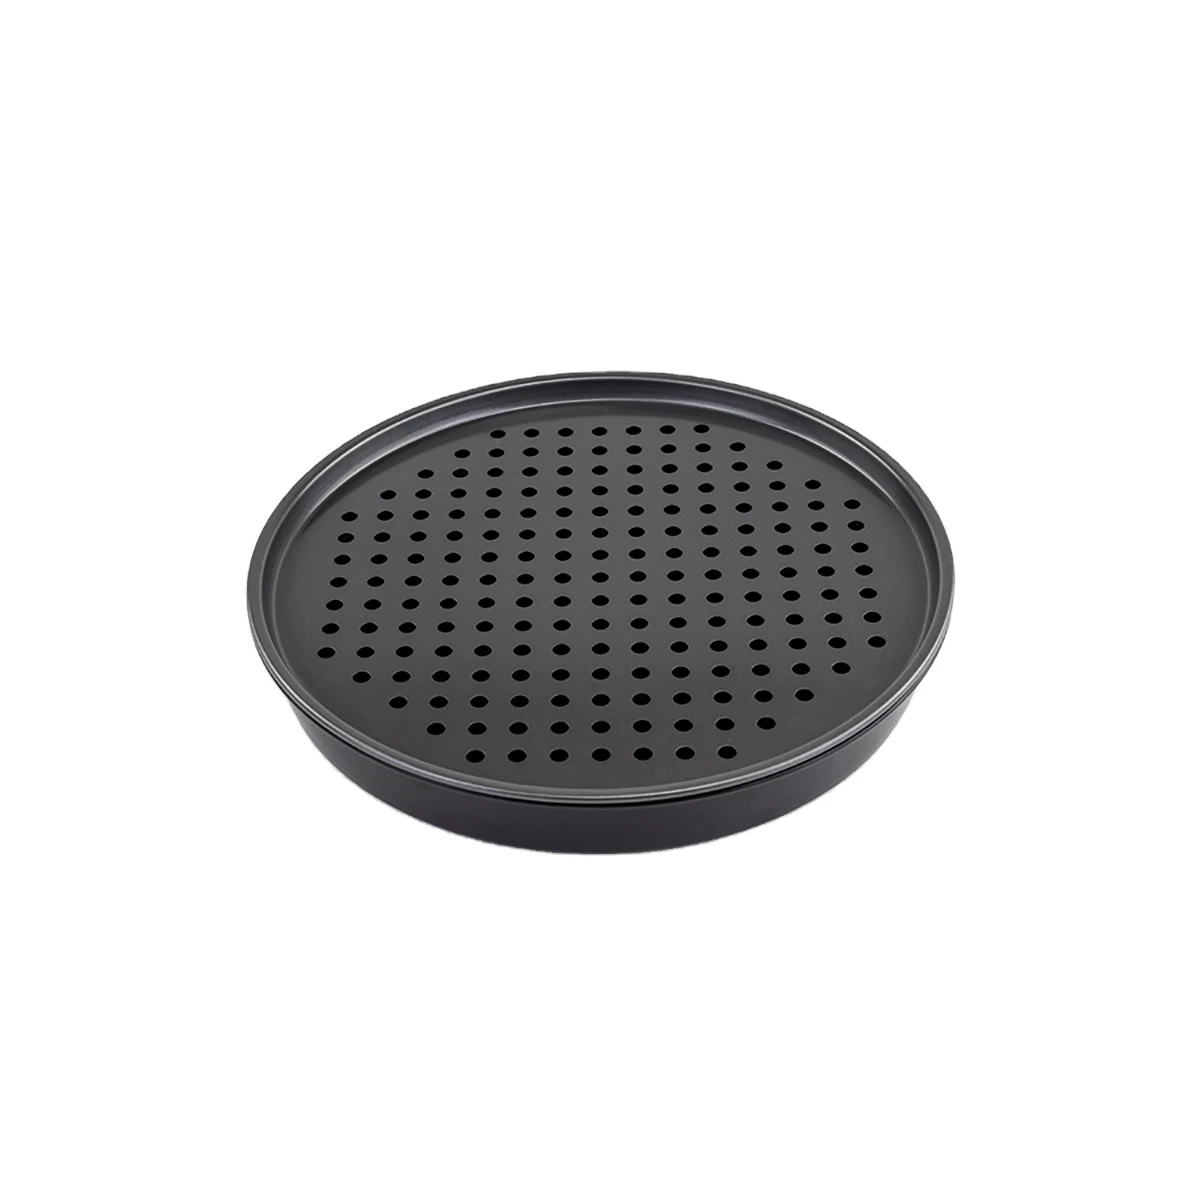 Popular Non-stick Coated Pizza Pan with Net Pizza Screen Mesh Tray Cookware